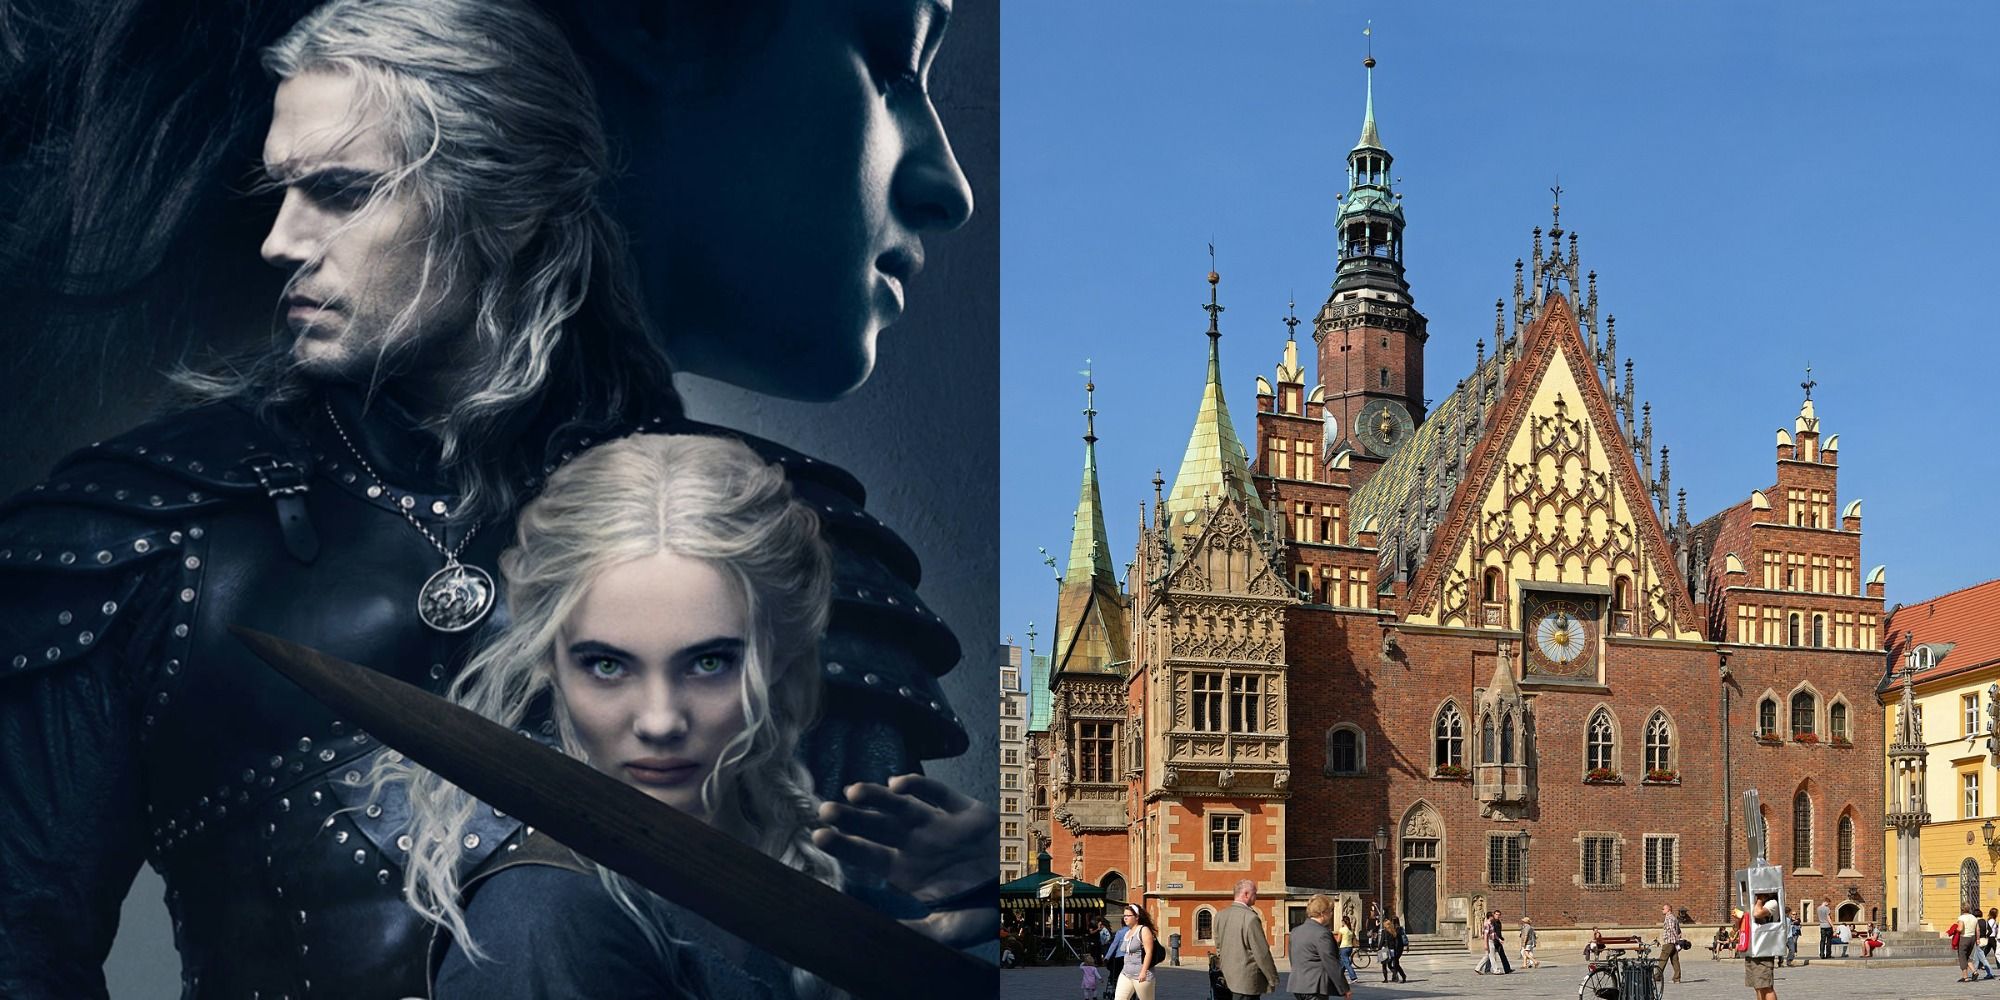 Split image showing the three MCs from The Witcher and the city of Wroclaw in Poland